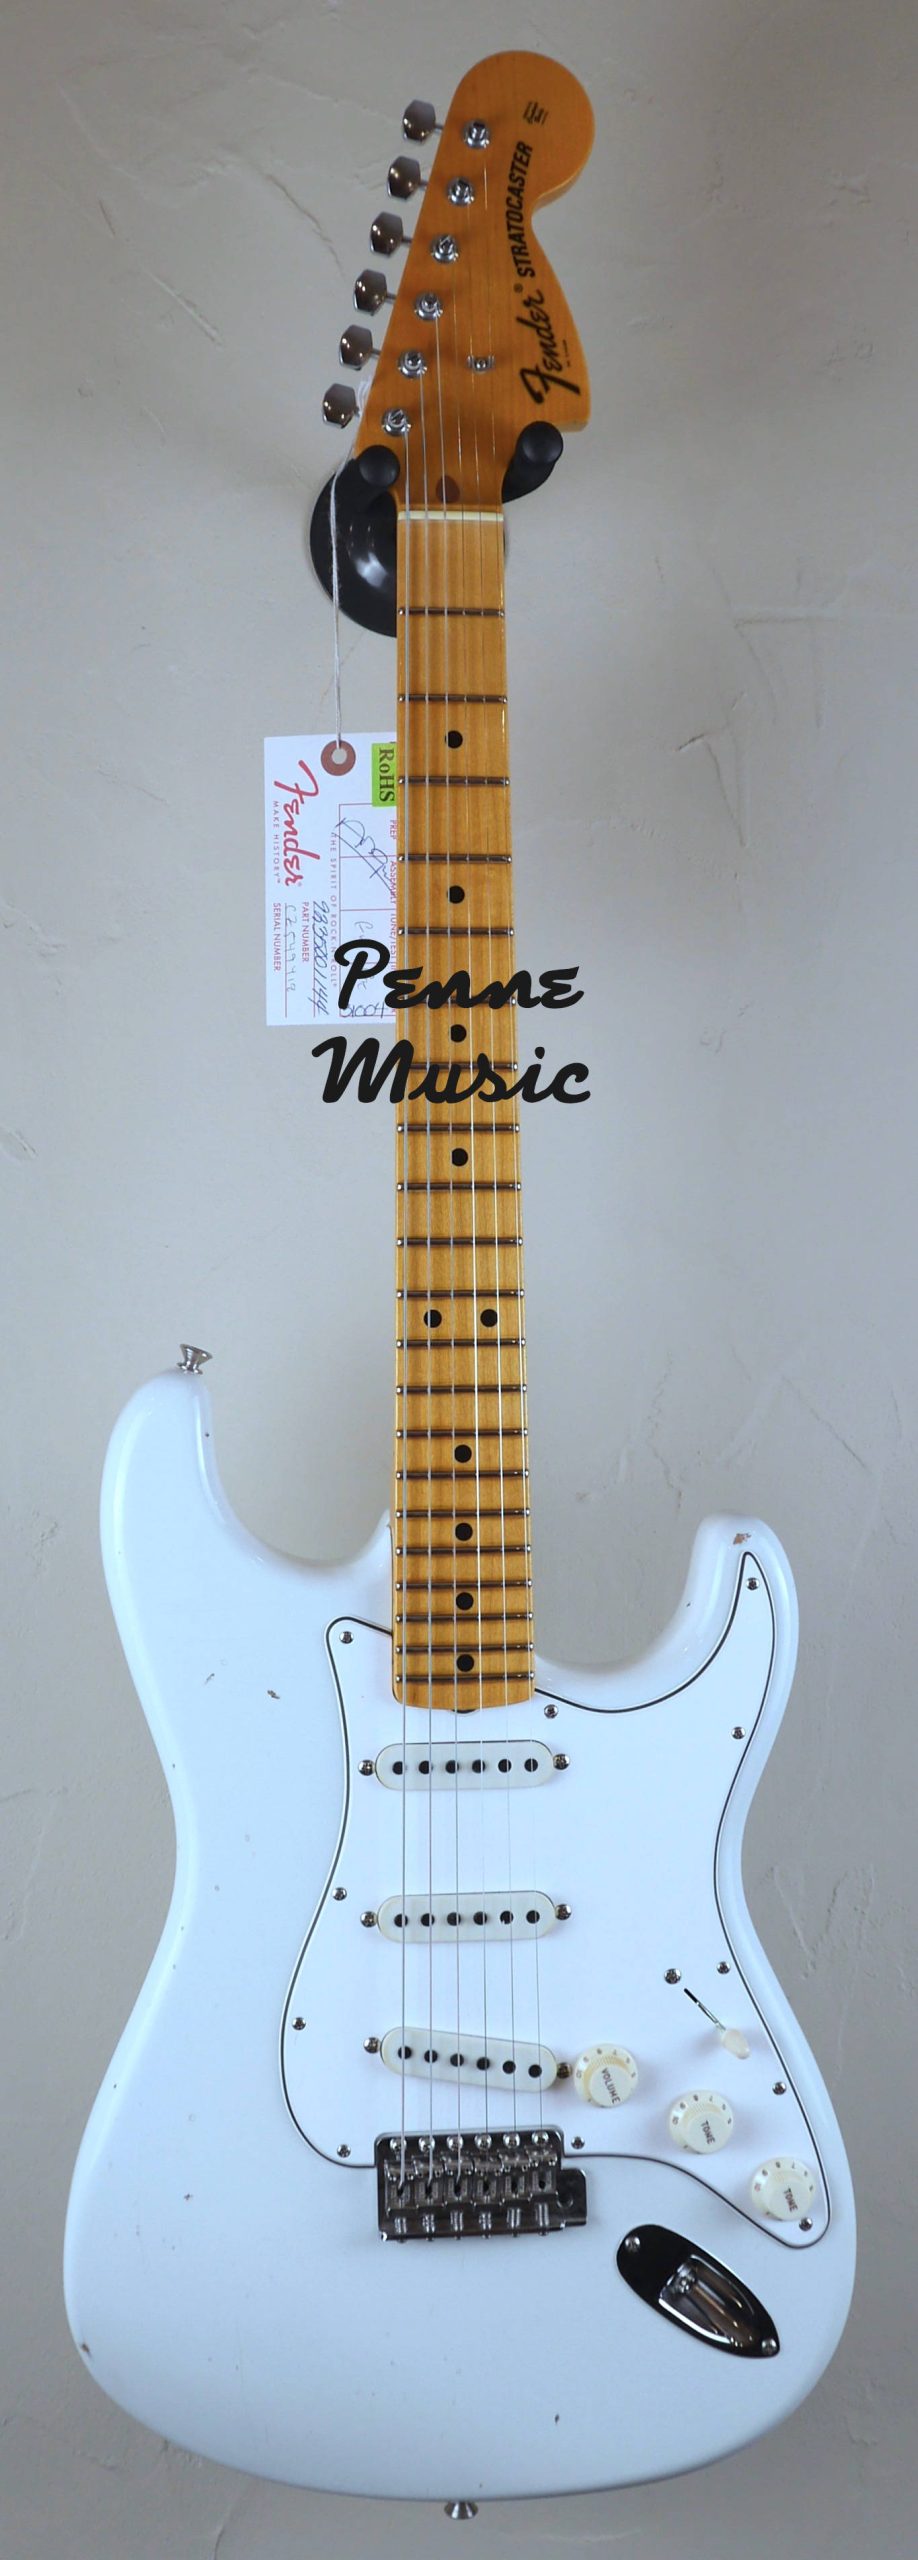 Fender Custom Shop Time Machine 70 Stratocaster Aged Olympic White J.Relic 2